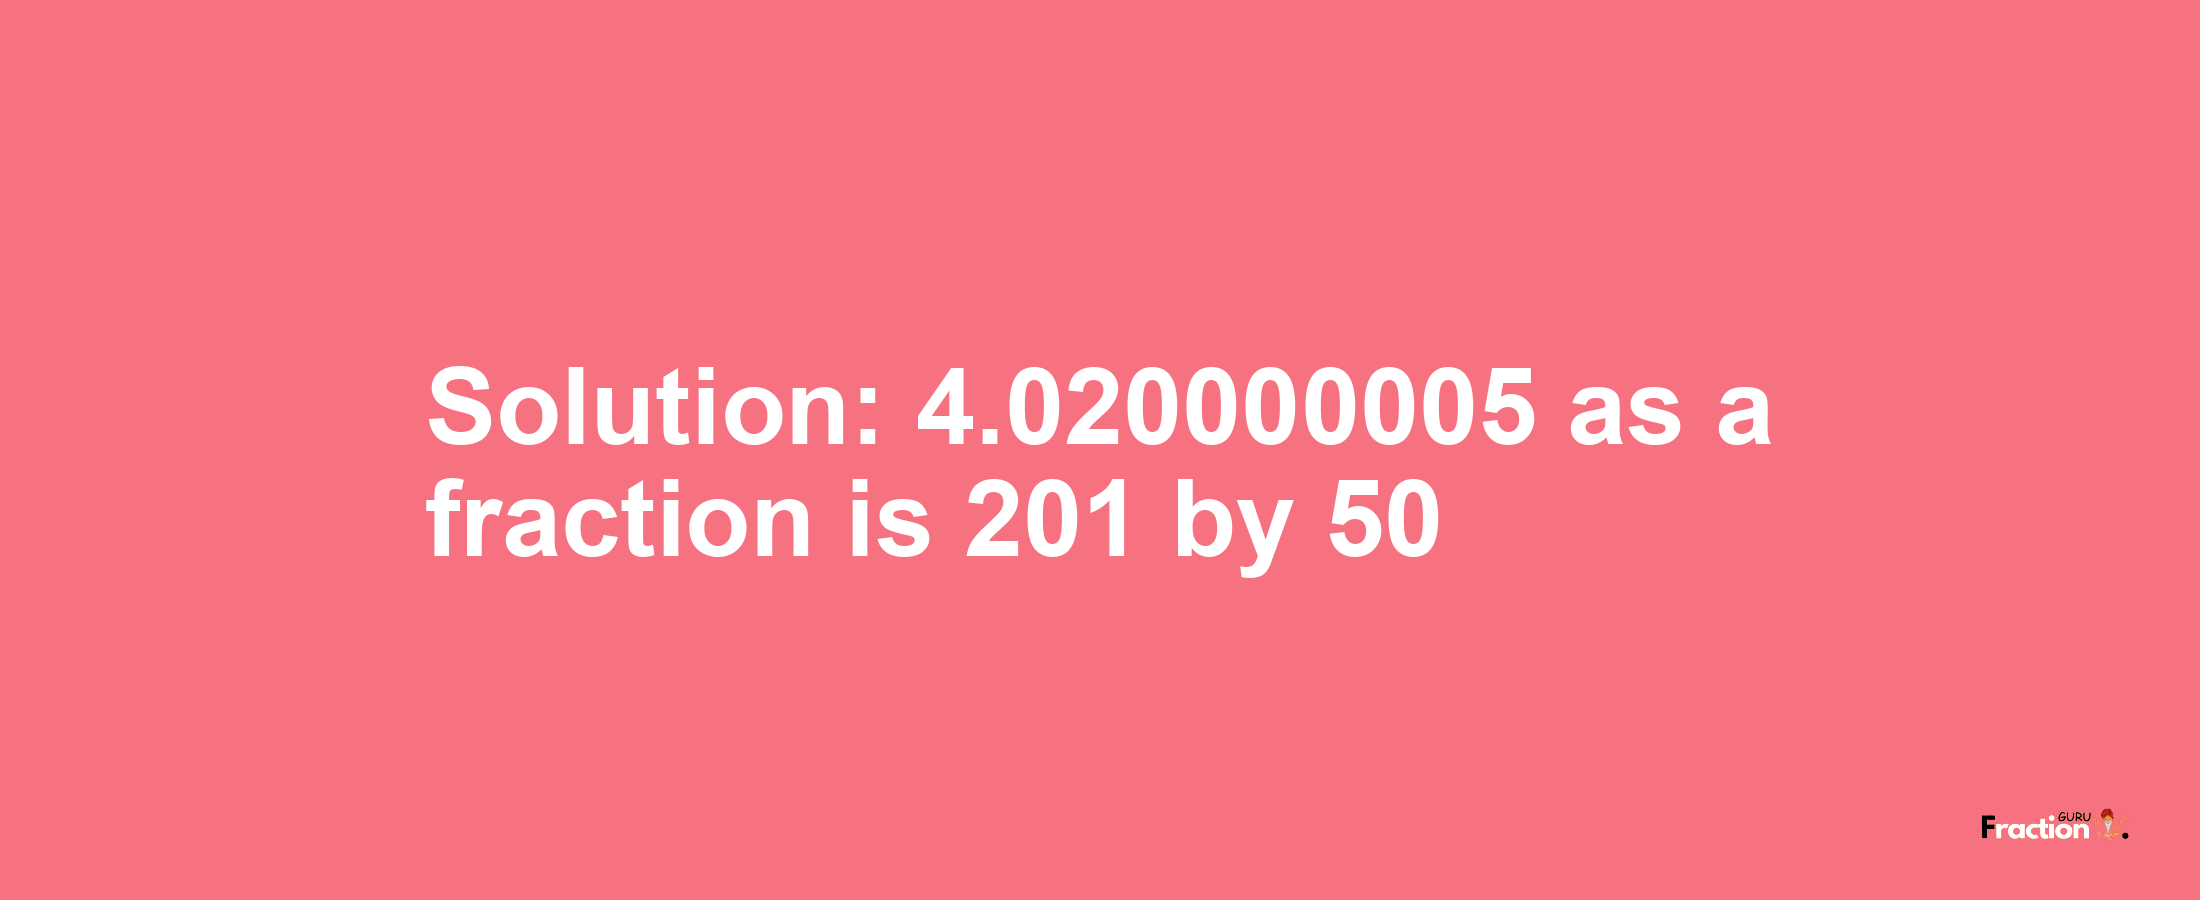 Solution:4.020000005 as a fraction is 201/50